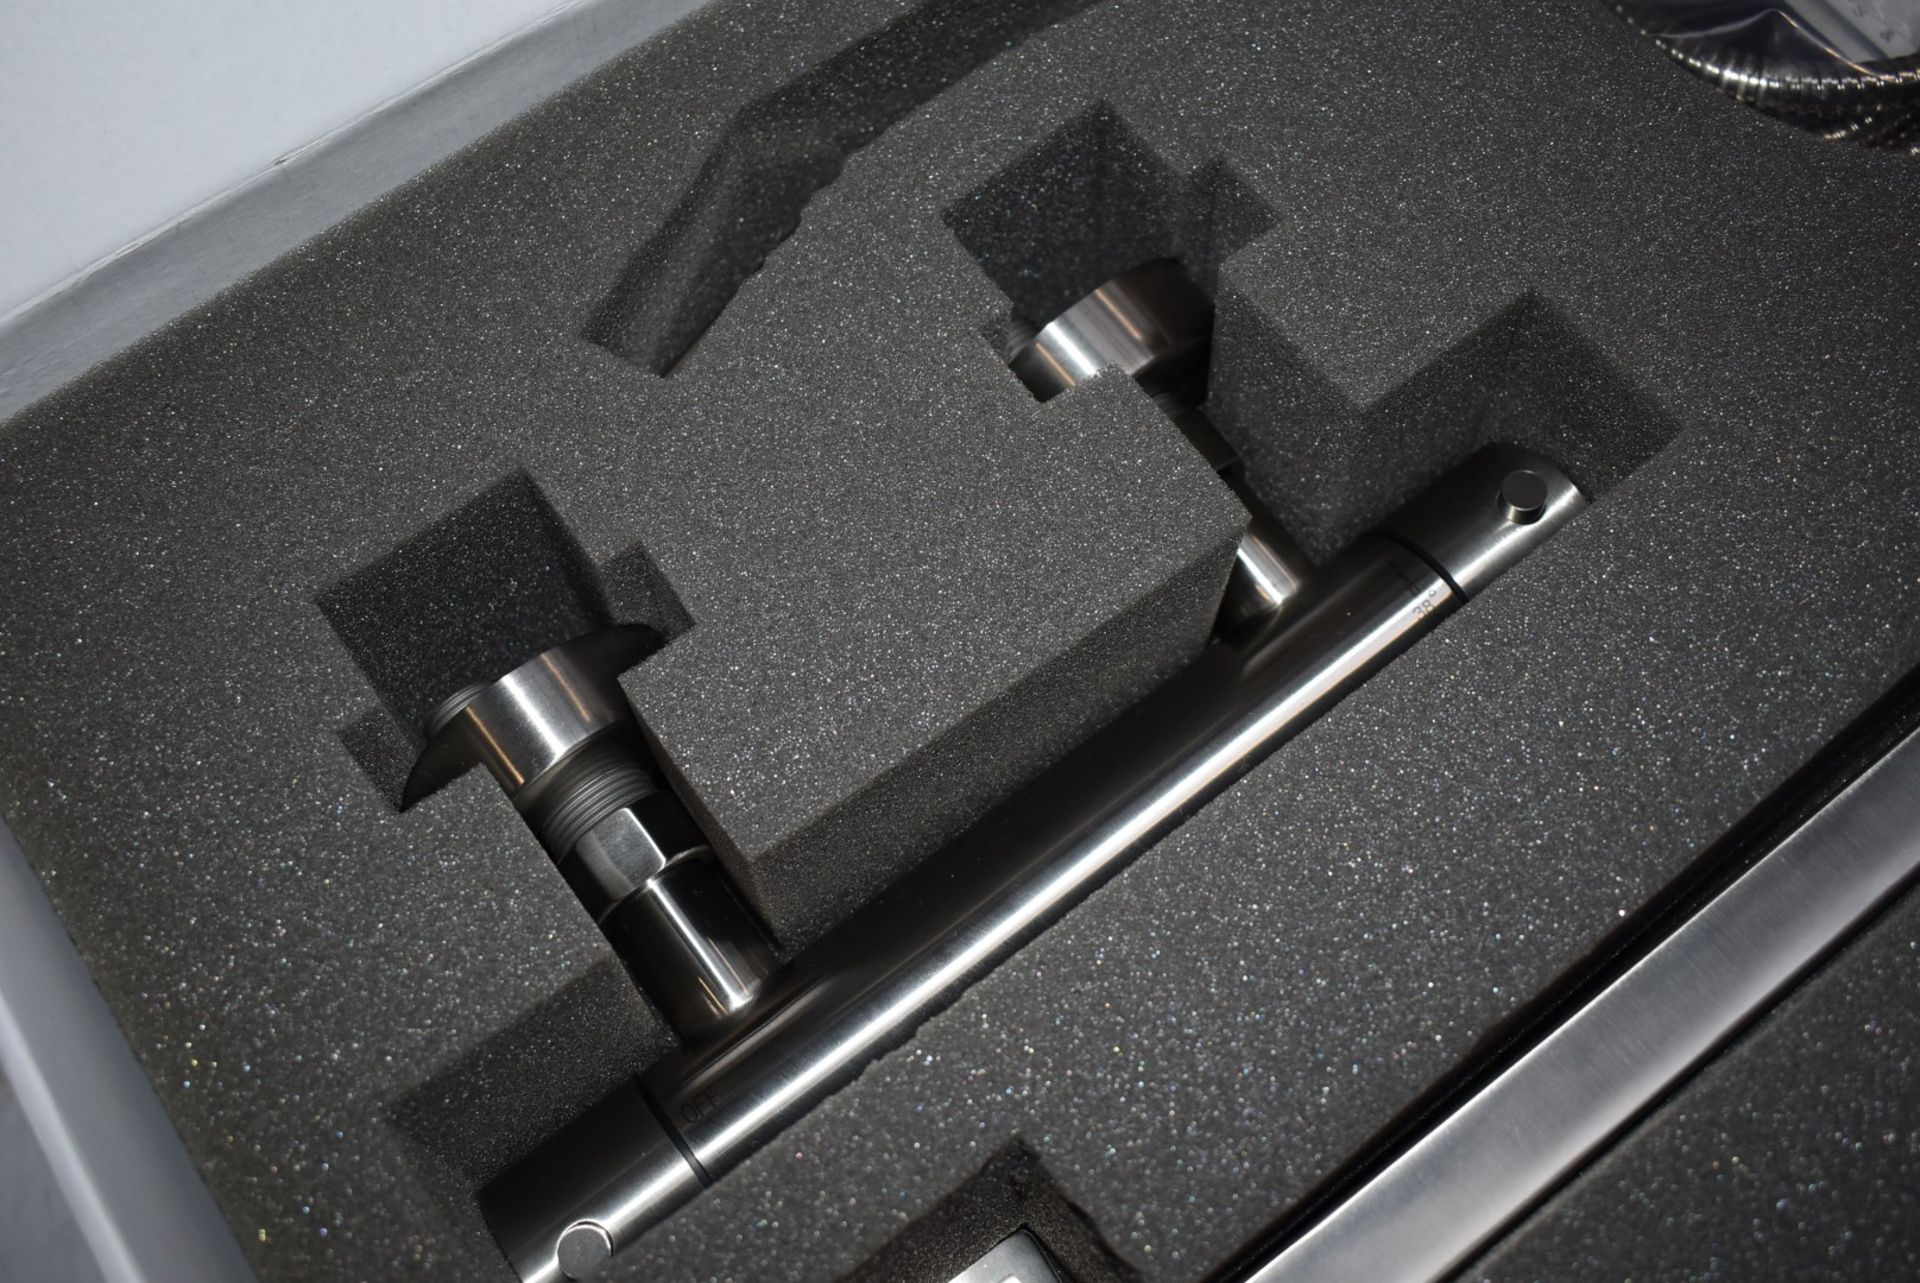 1 x Stonearth 'Metro' Stainless Thermostatic Shower Kit - Brand New & Boxed - RRP £495 - Ref: - Image 10 of 14